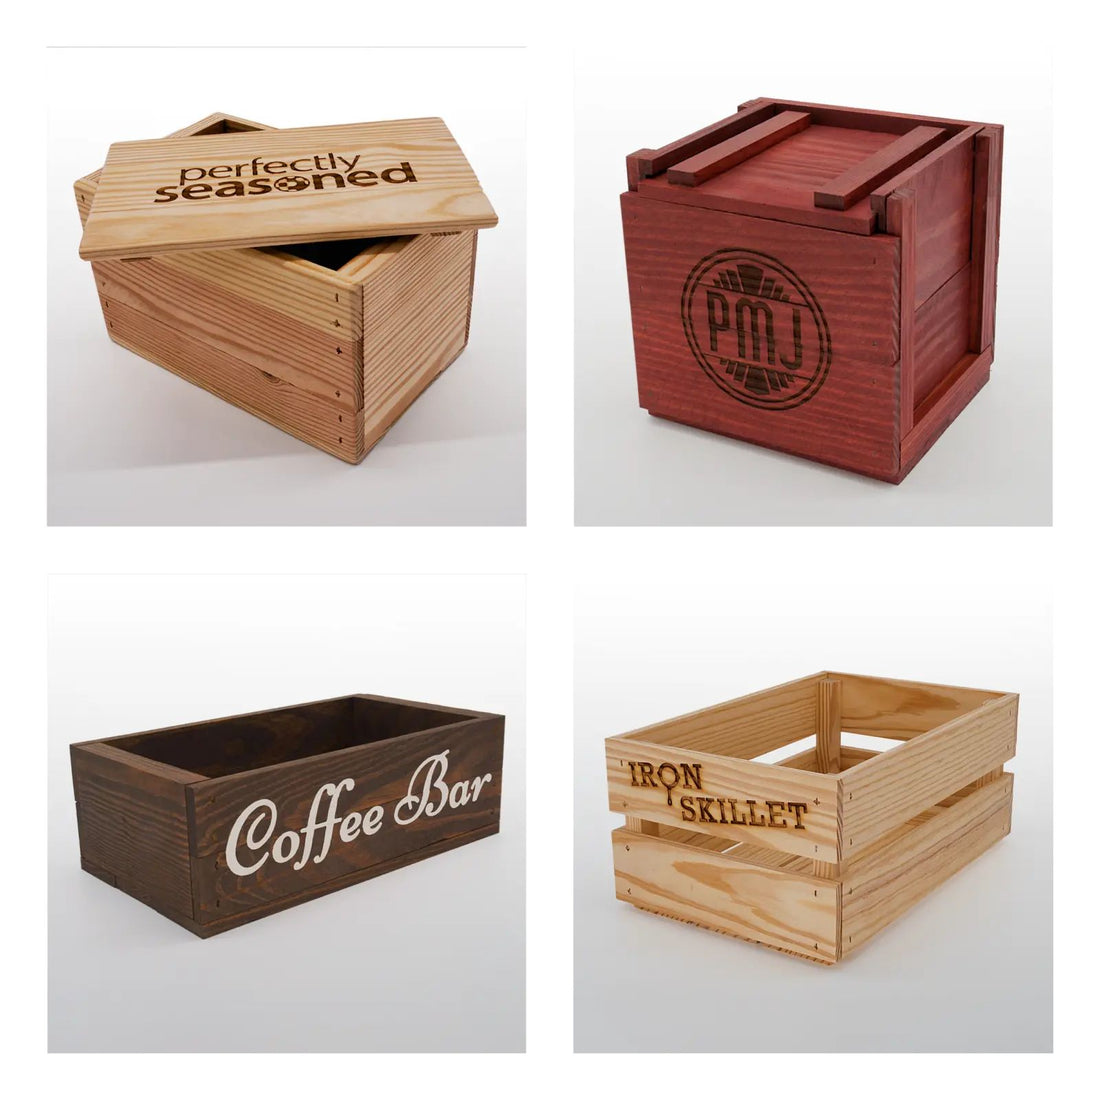 Building buzz: Using limited-edition wooden crates for special events